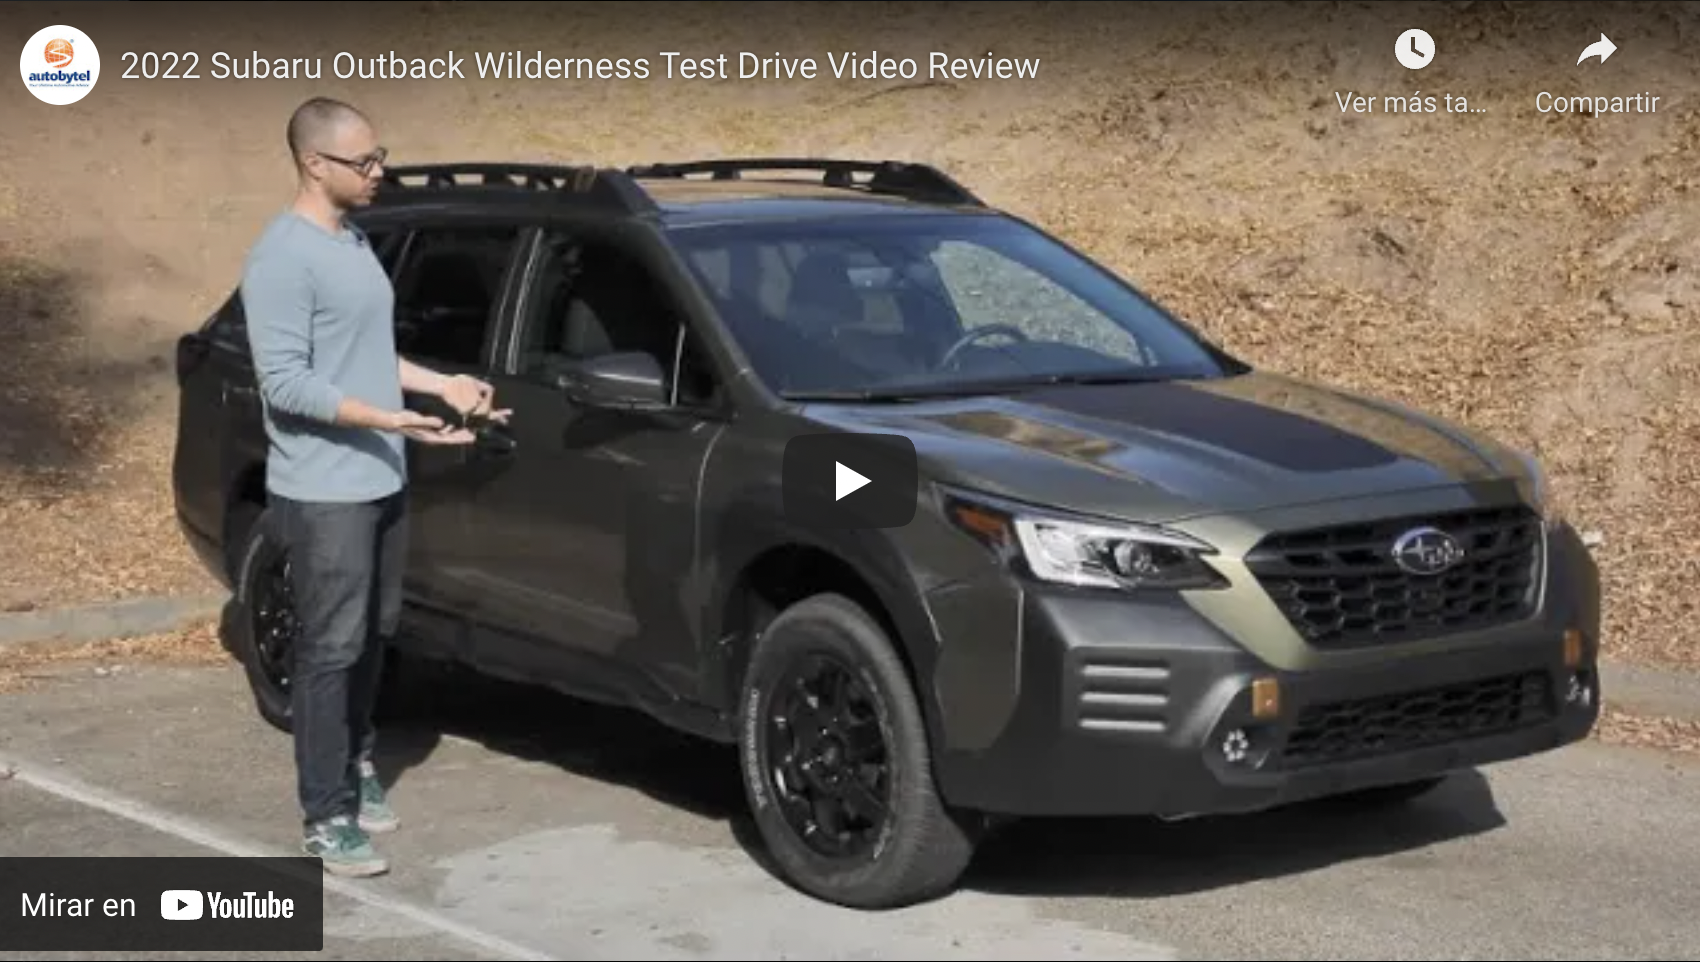 2022 Subaru Outback Wilderness Test Drive Video Review